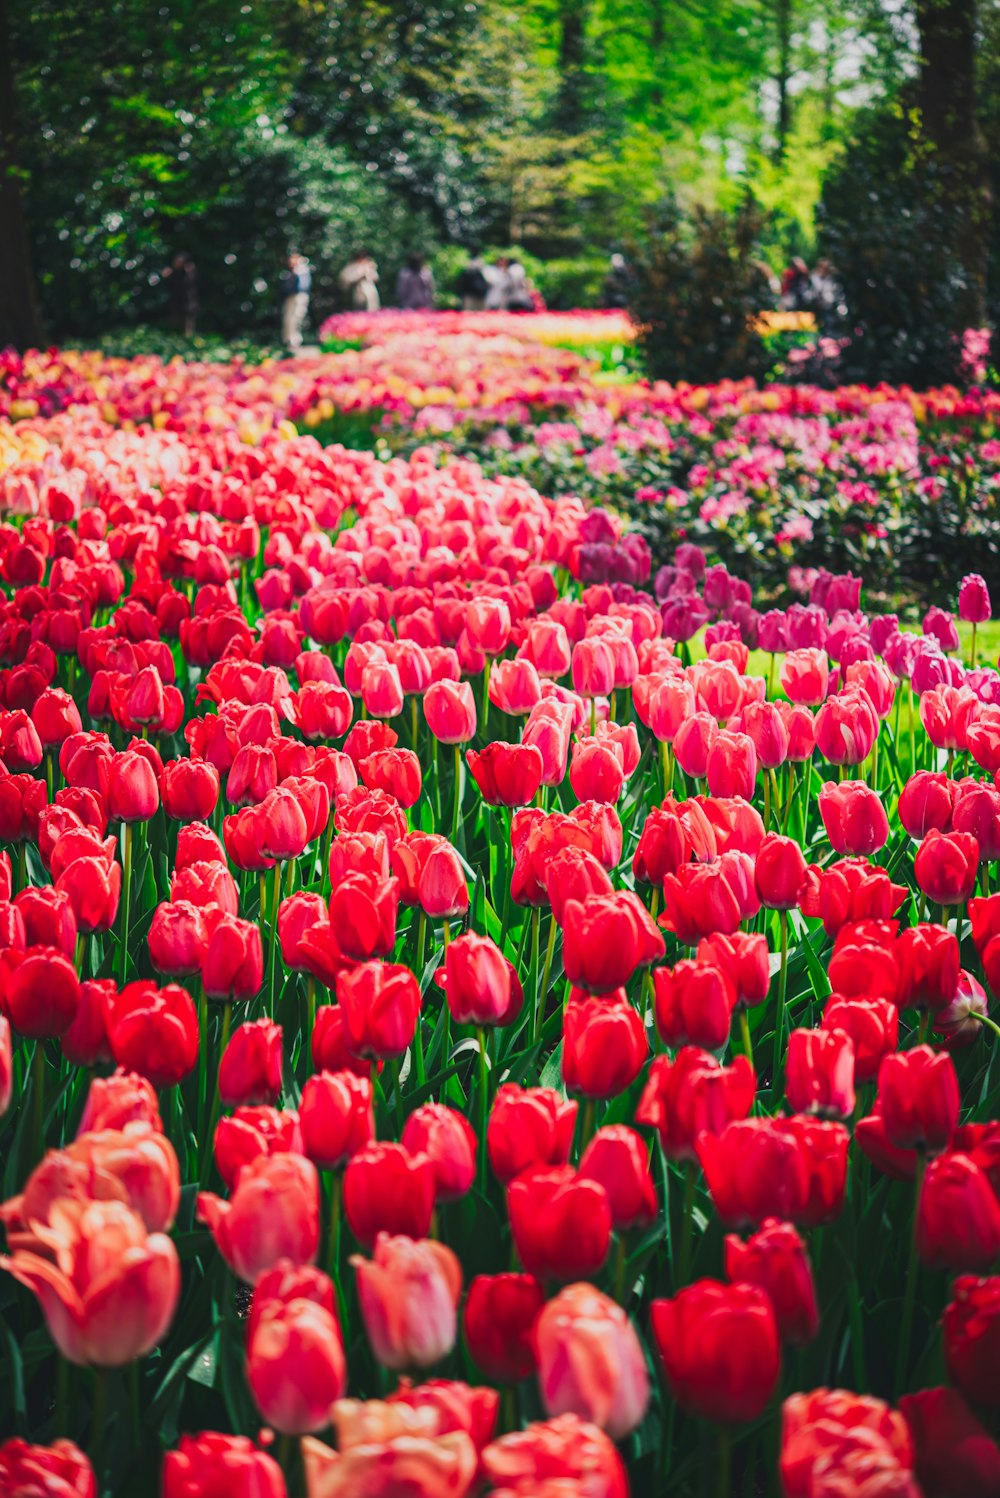 a field of red and pink tulips in a park